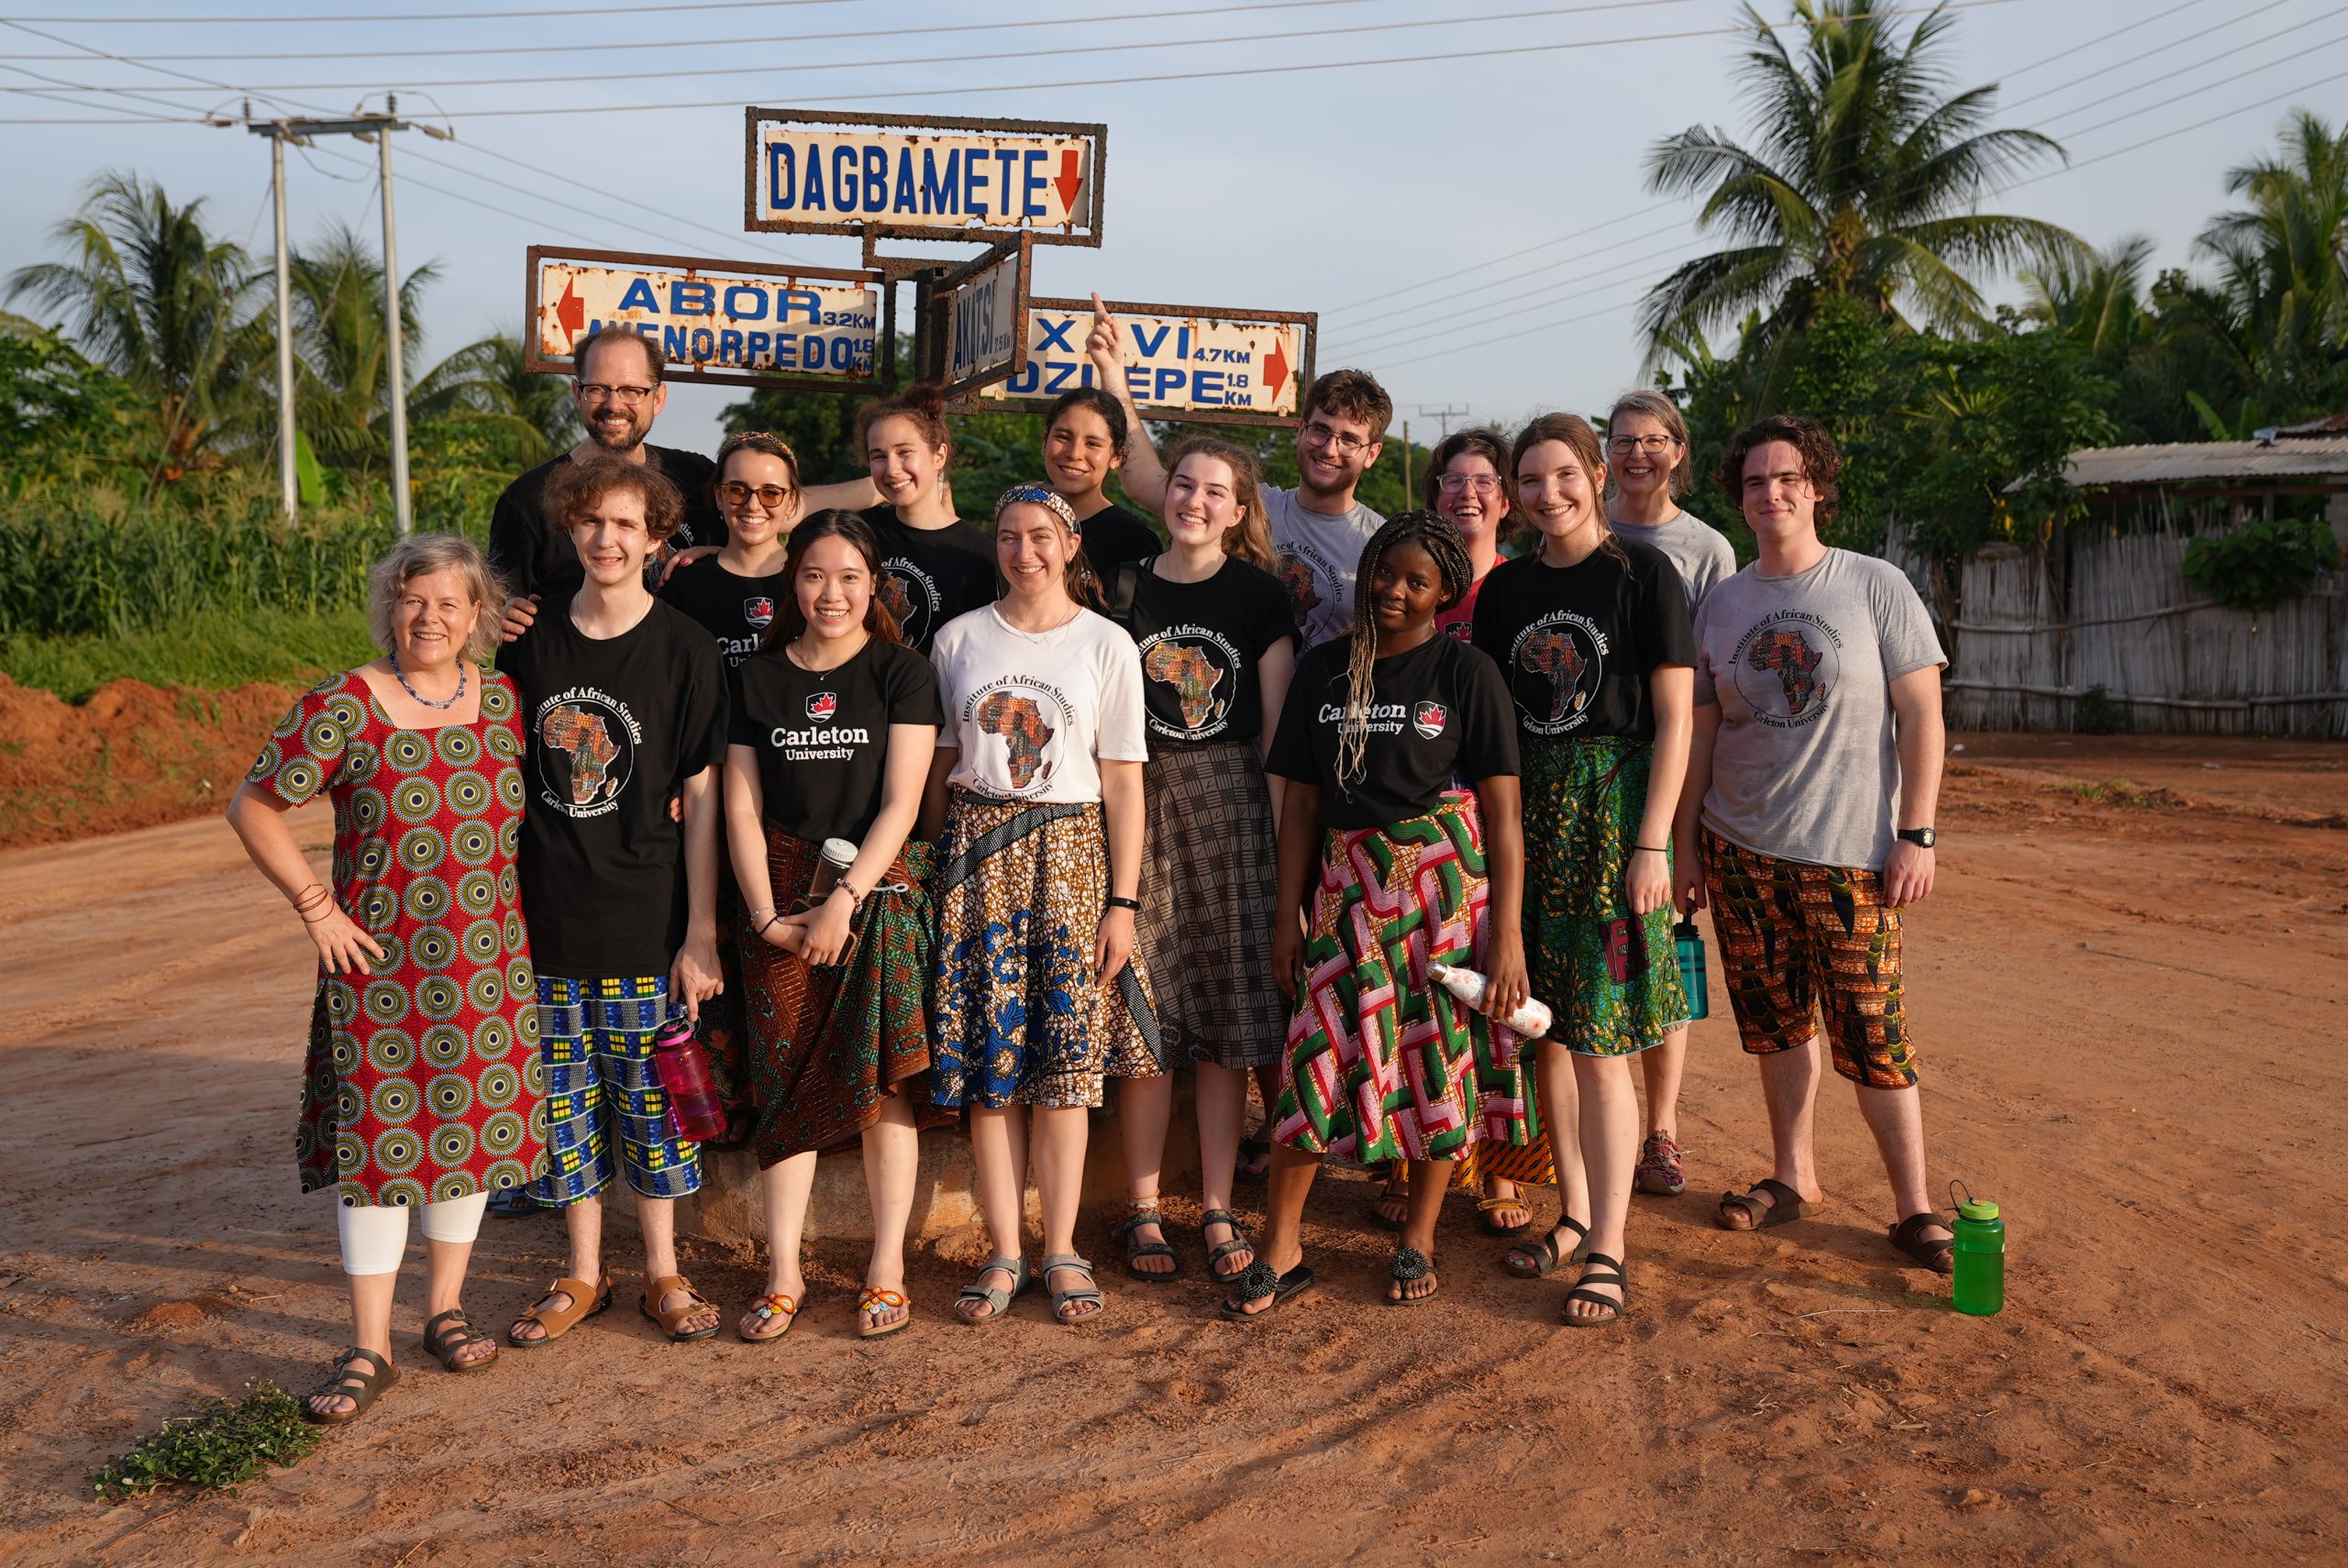 Group photo of Carleton students, faculty and staff in Ghana in front of Dagbamate village sign